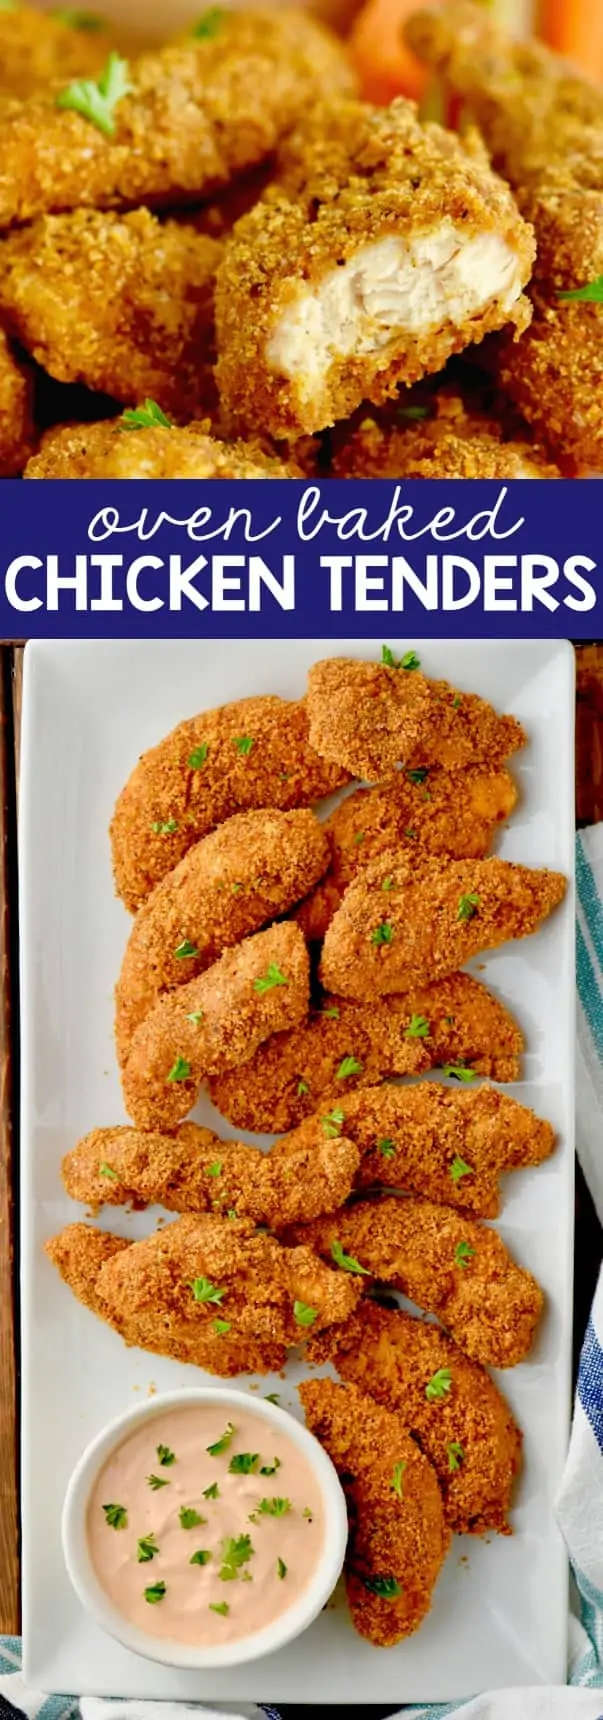 collage of photos of oven baked chicken tenders